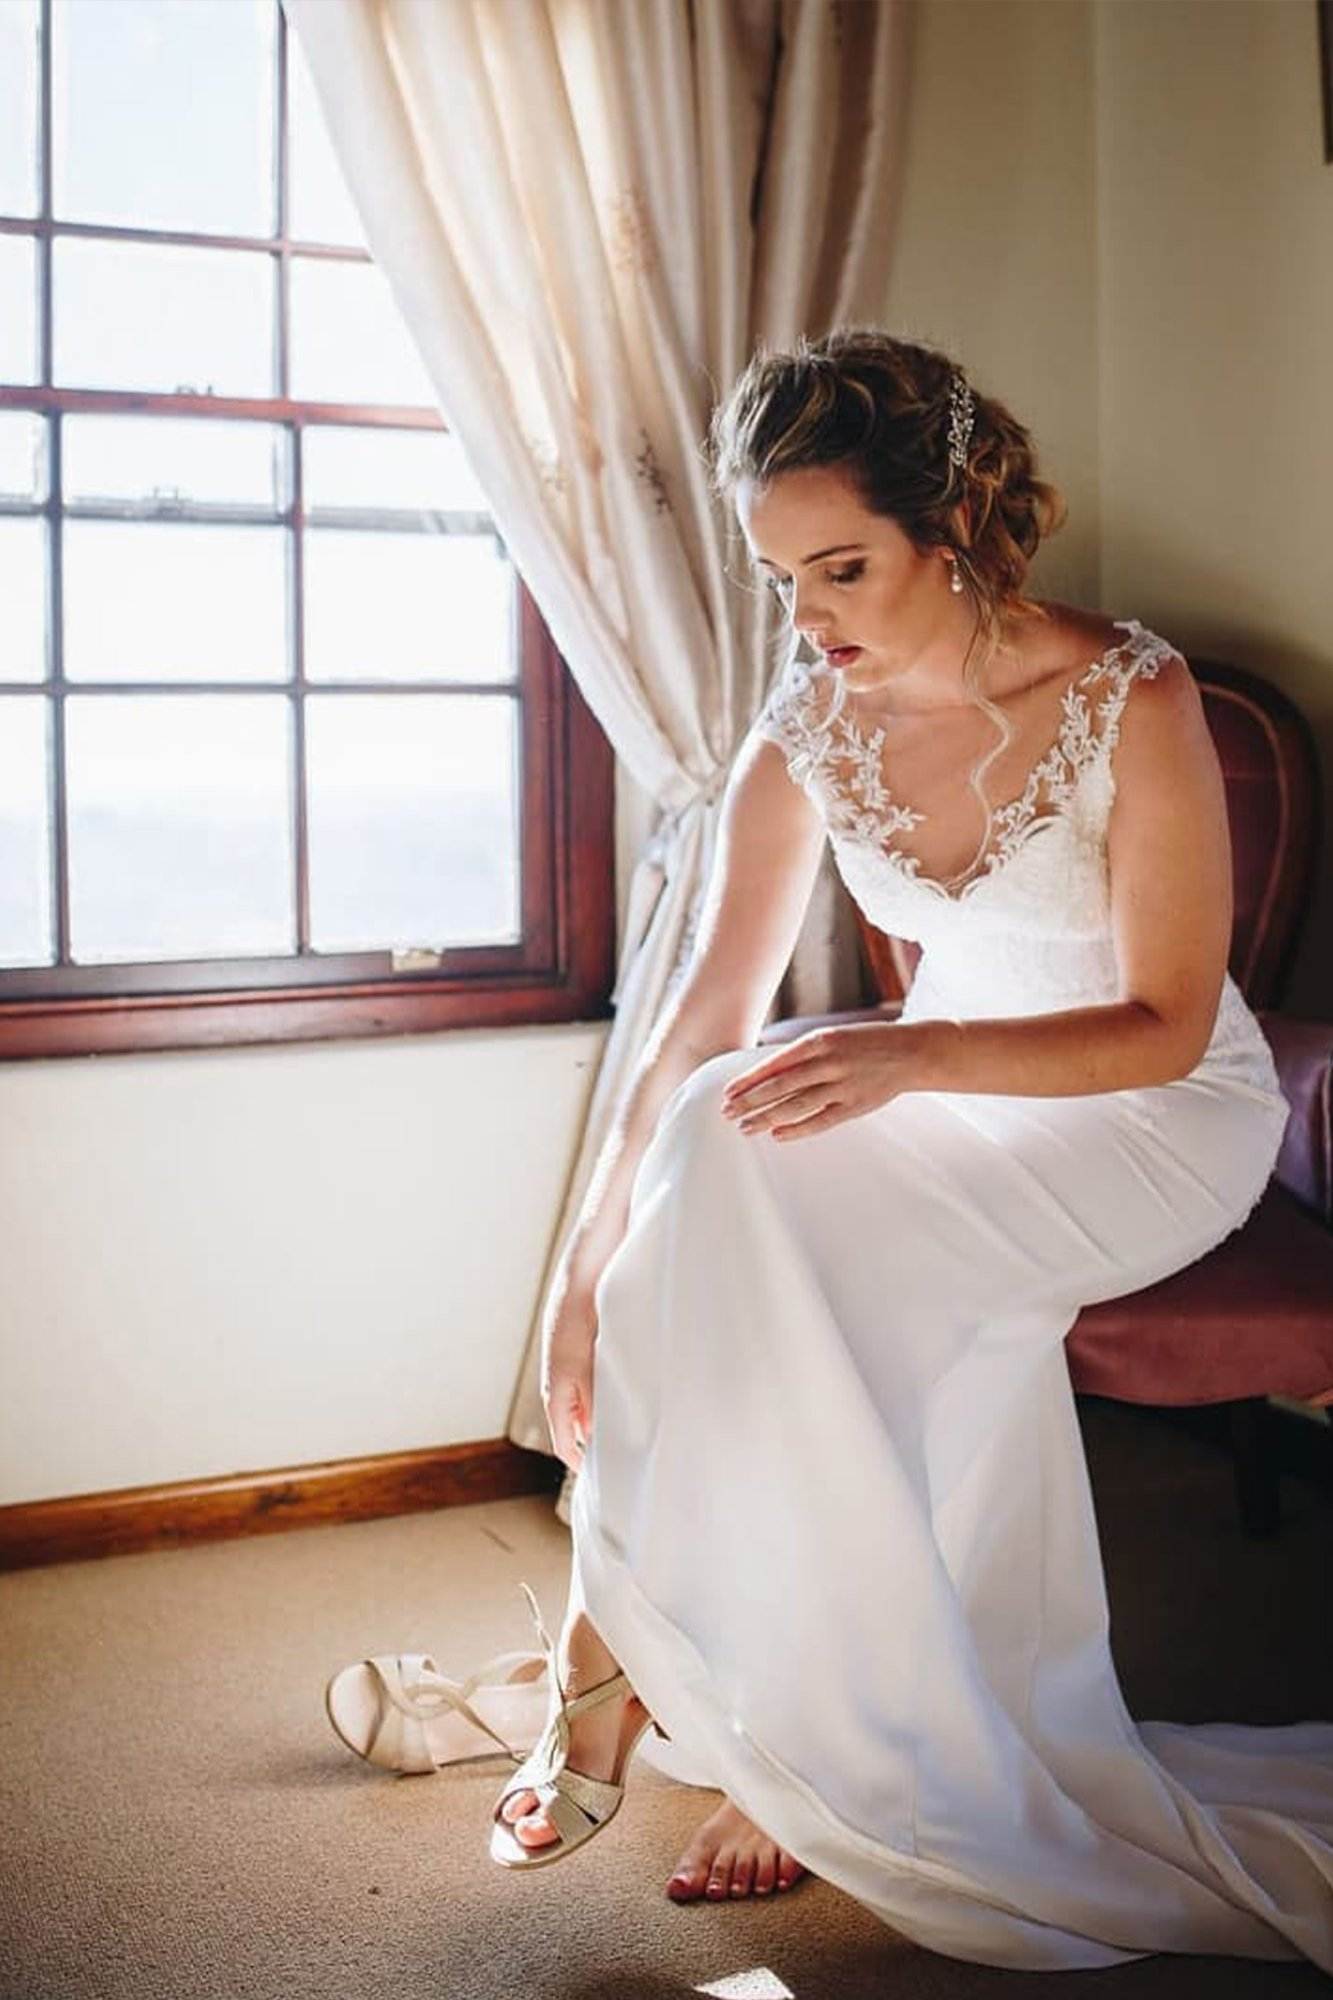 Valencia Harrison Designs - Wedding Dresses In South Africa Cape Town